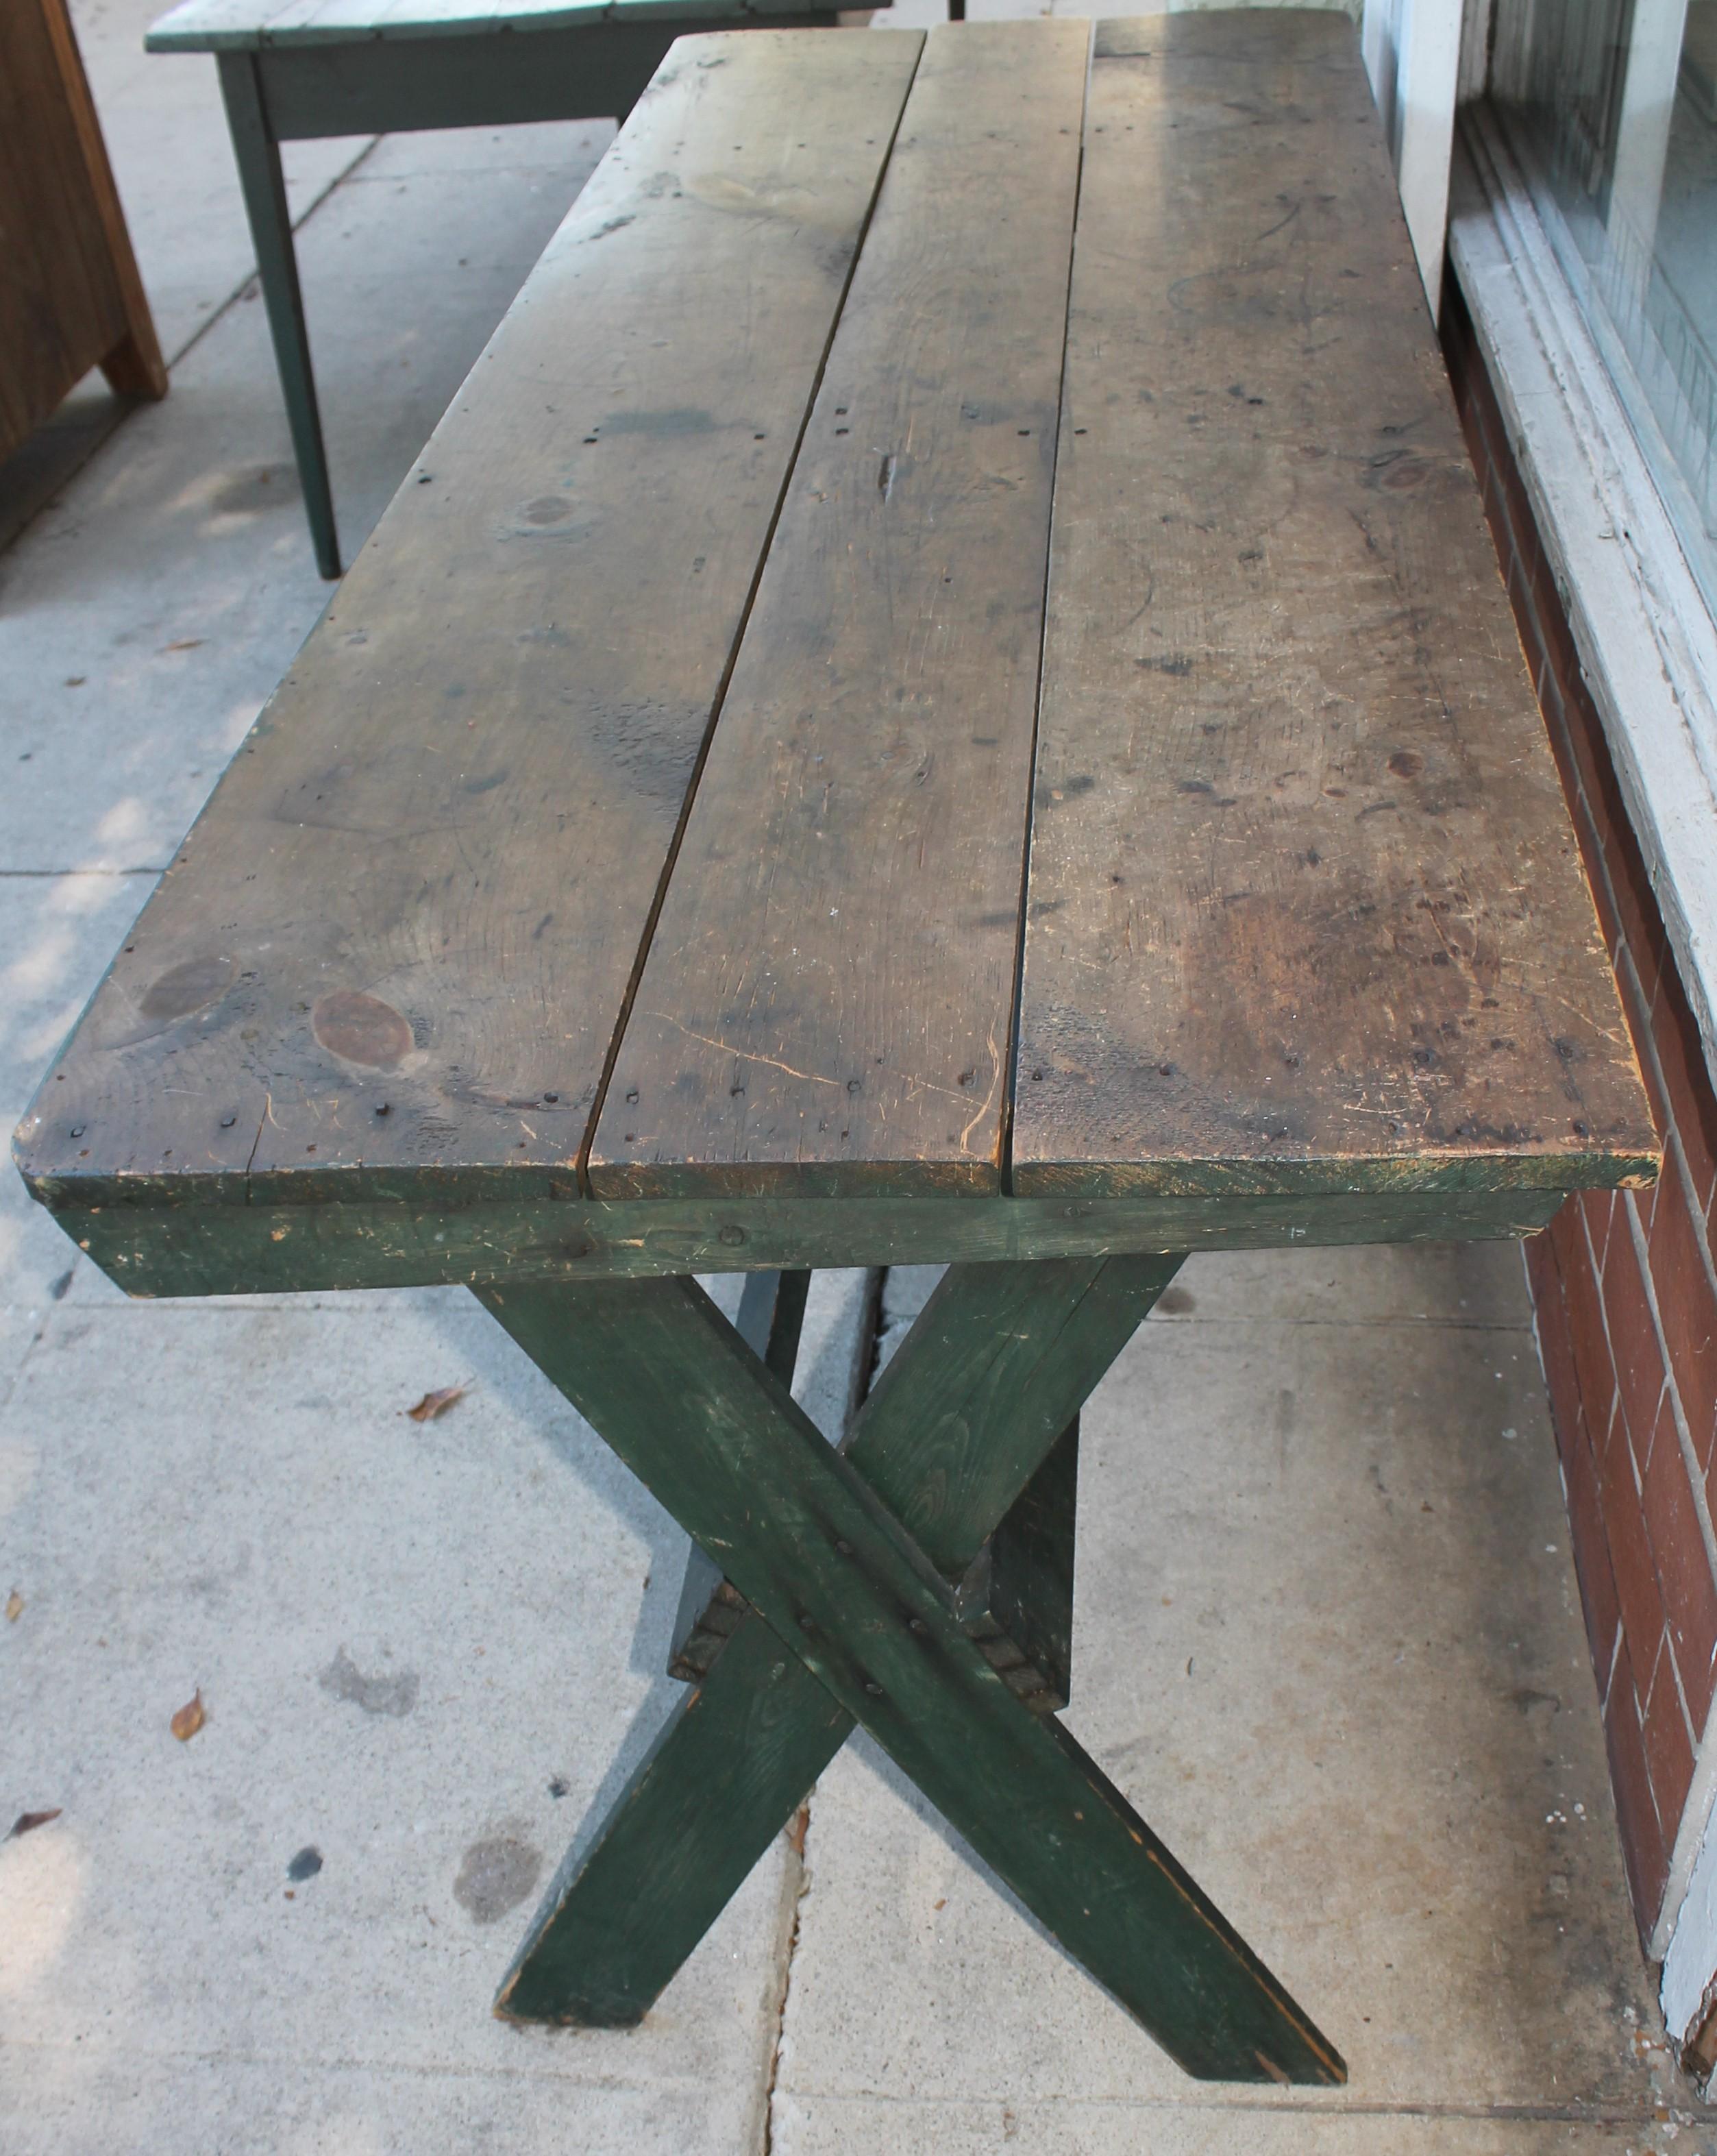 19th Century 19th C Lg Saw Buck Table in Original Green Paint